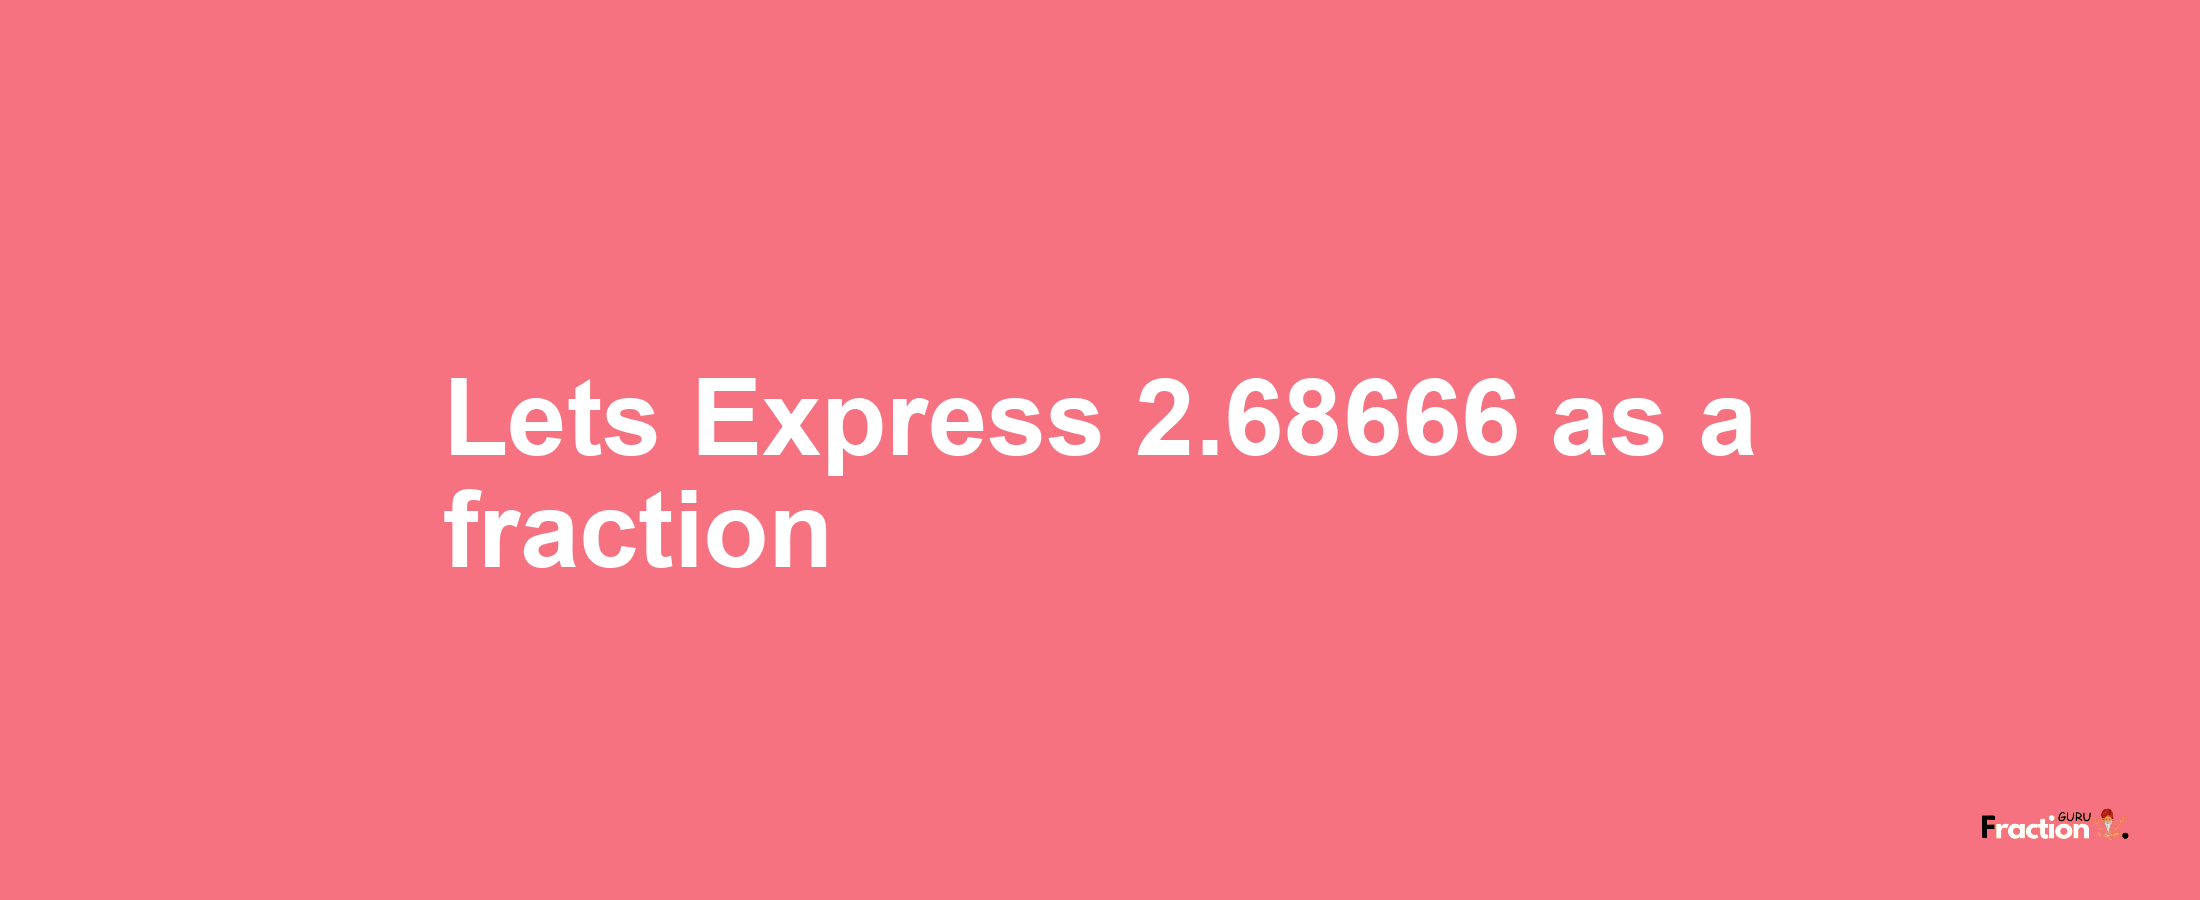 Lets Express 2.68666 as afraction